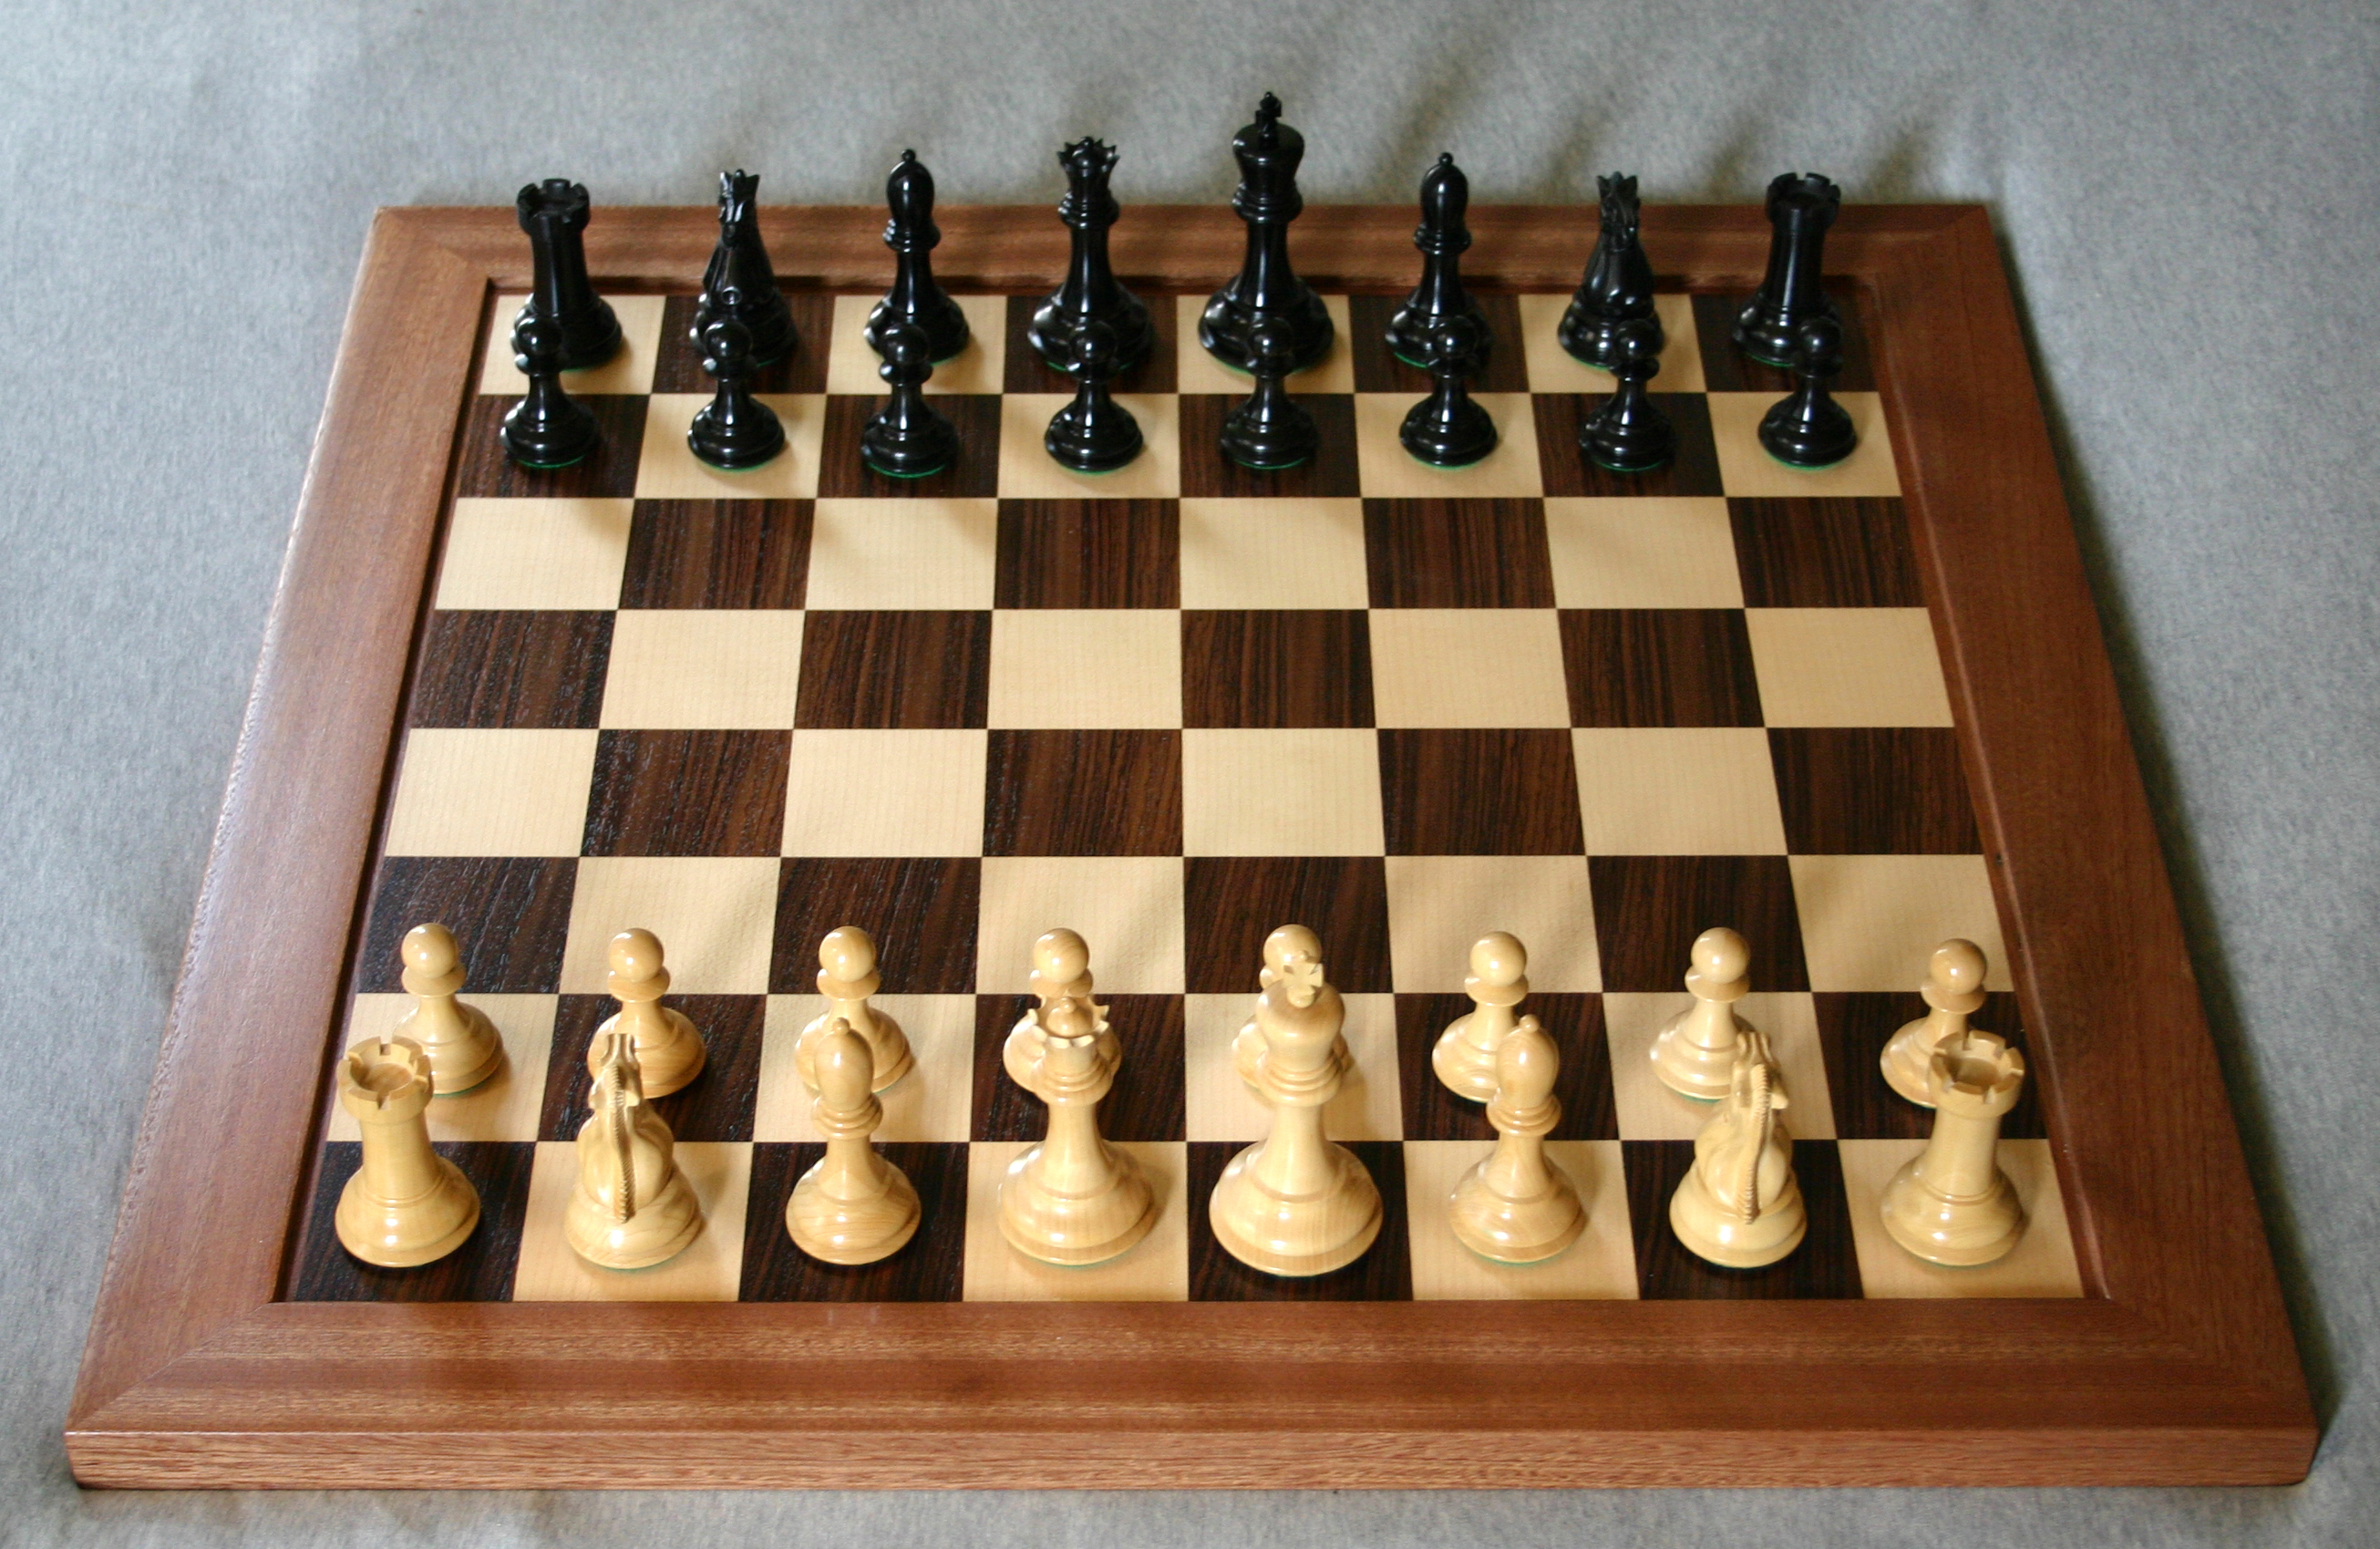 Chess like politics is a war game - How to Win for Would-be Winners